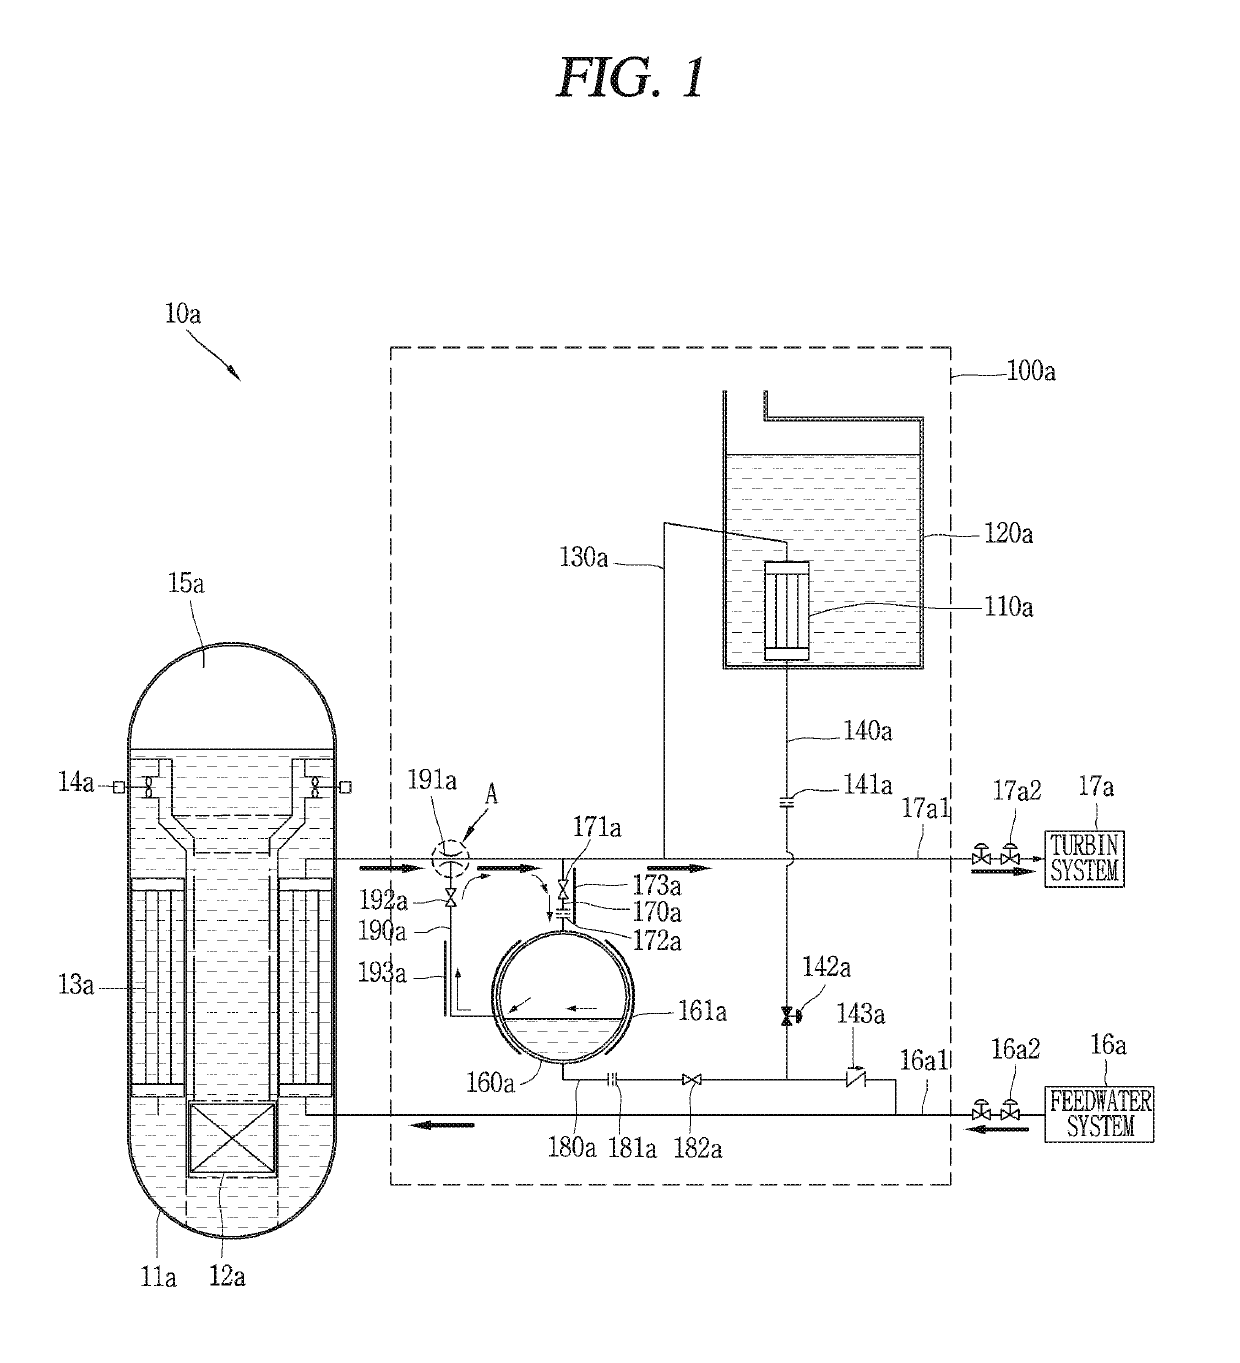 Passive heat removal system for nuclear power plant